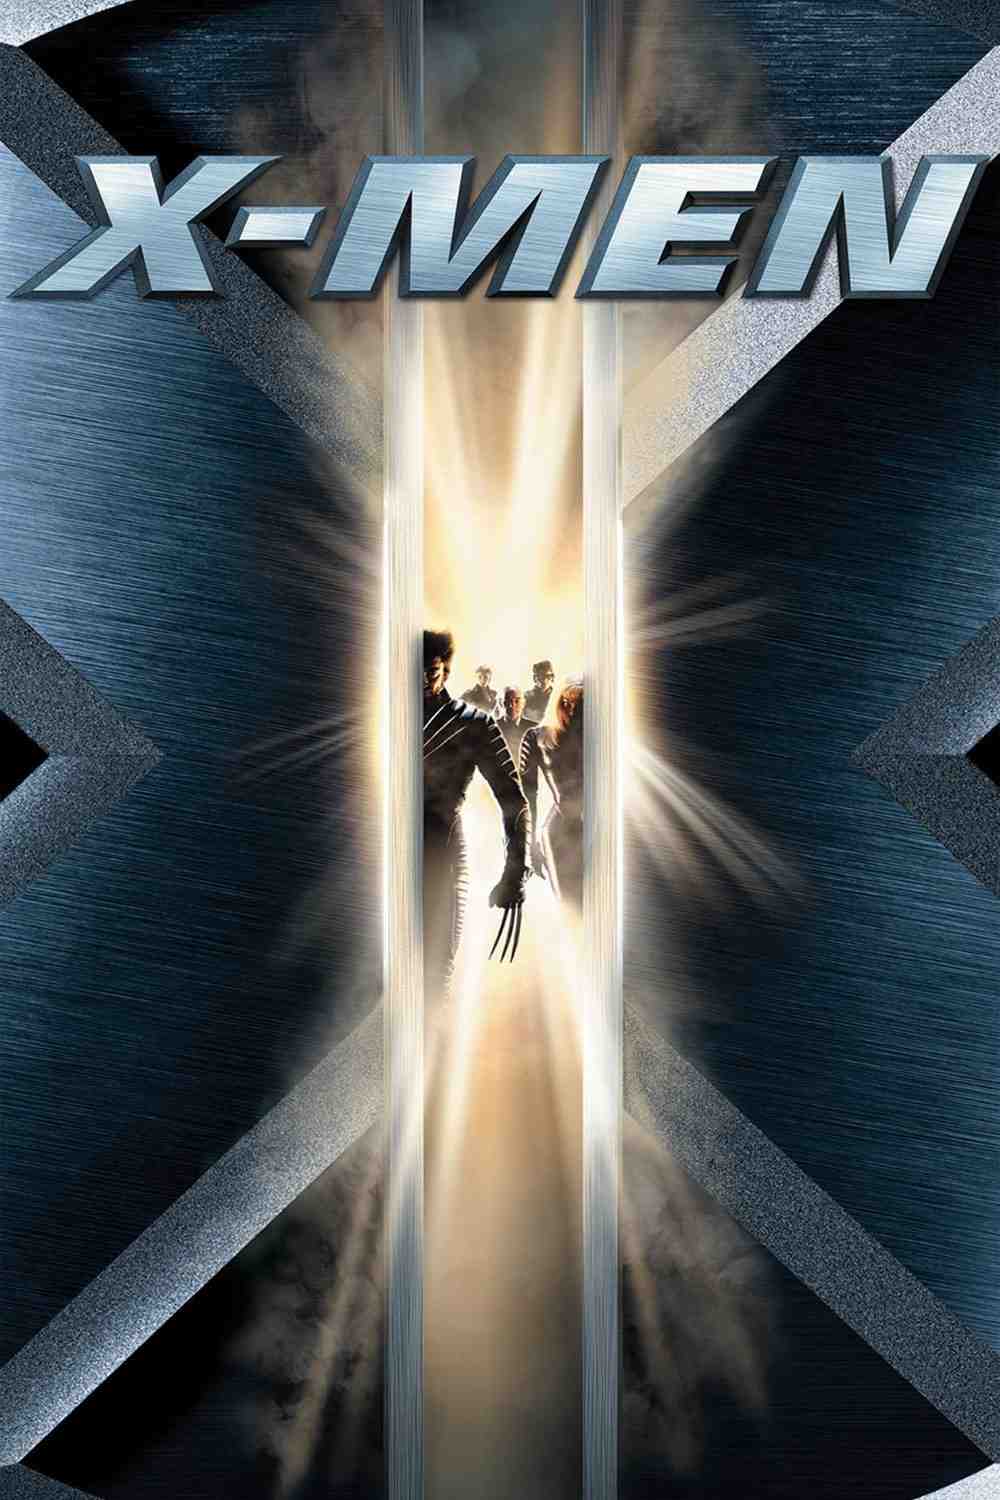 A poster reading X-Men at the top, with silhouettes framed by a large X